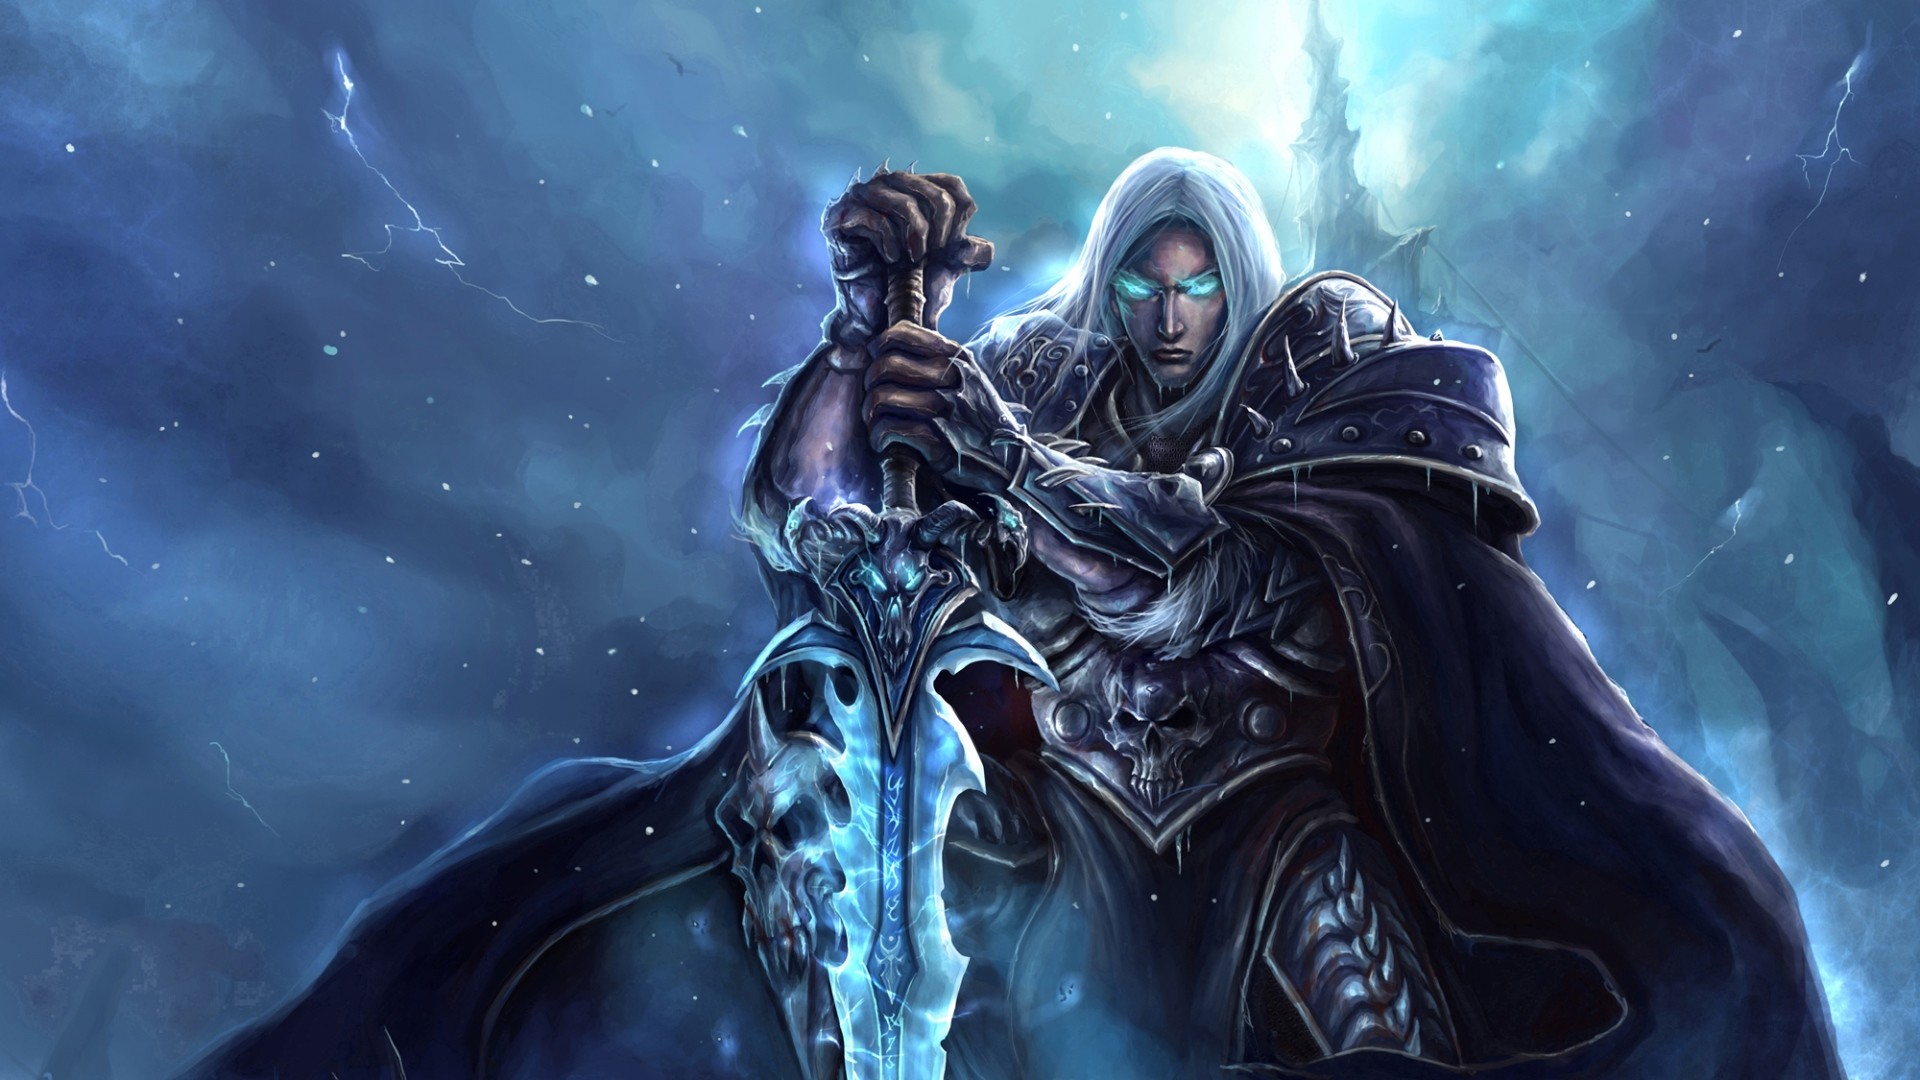 1920x1080 Images of Lich King Wallpaper 1080 - #SC The lich king - wowwiki - your  guide to the world of warcraft, The .